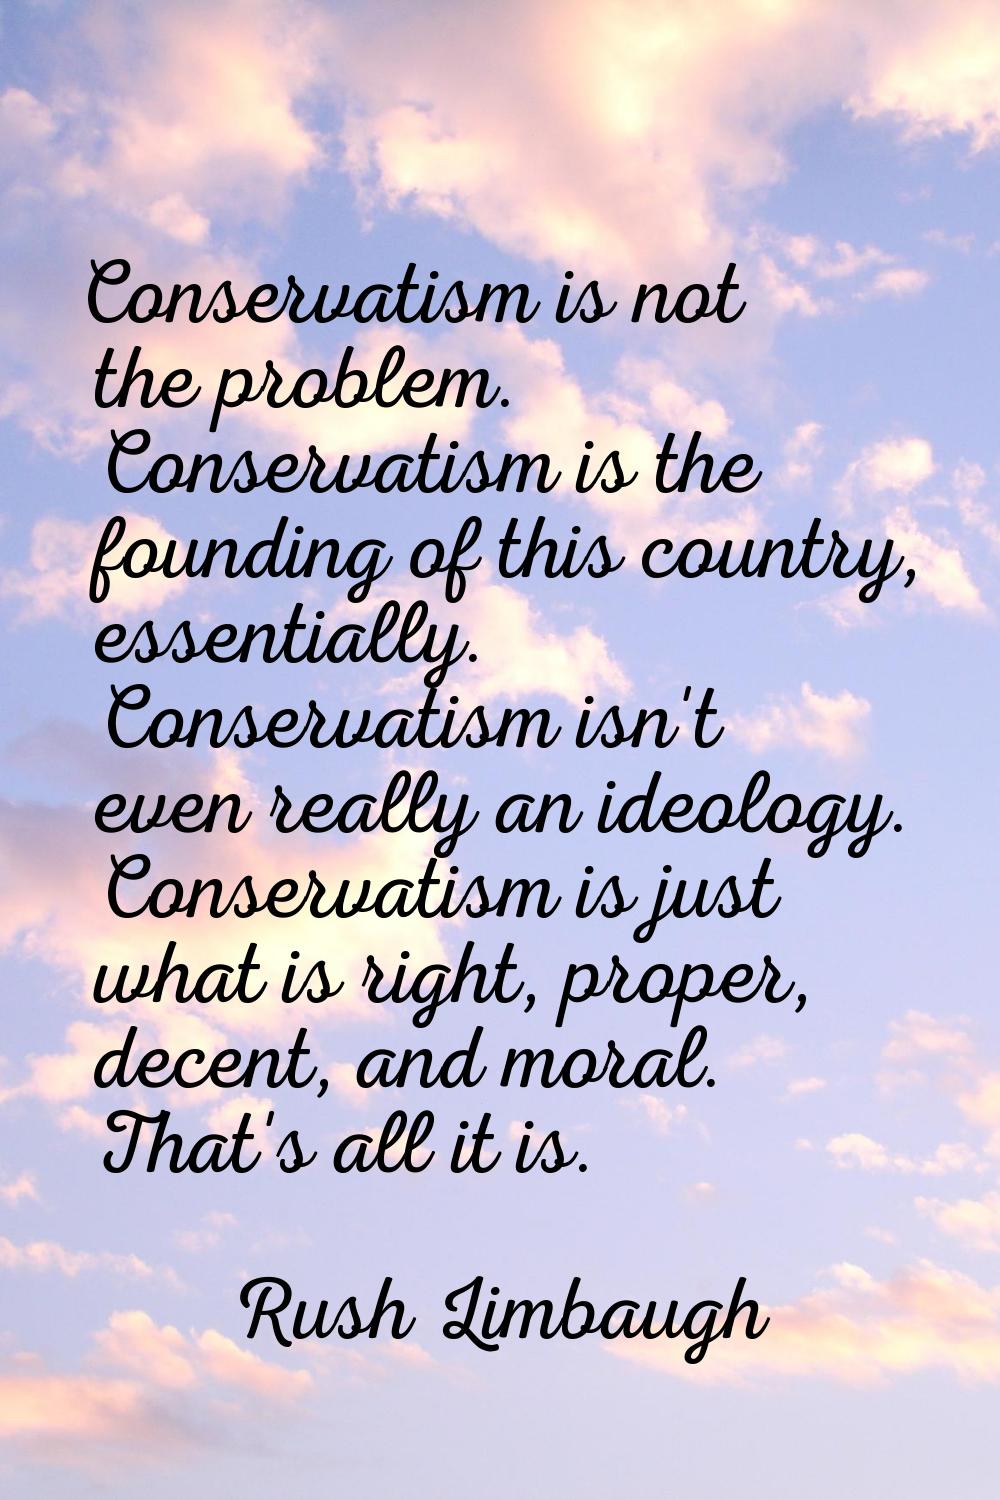 Conservatism is not the problem. Conservatism is the founding of this country, essentially. Conserv